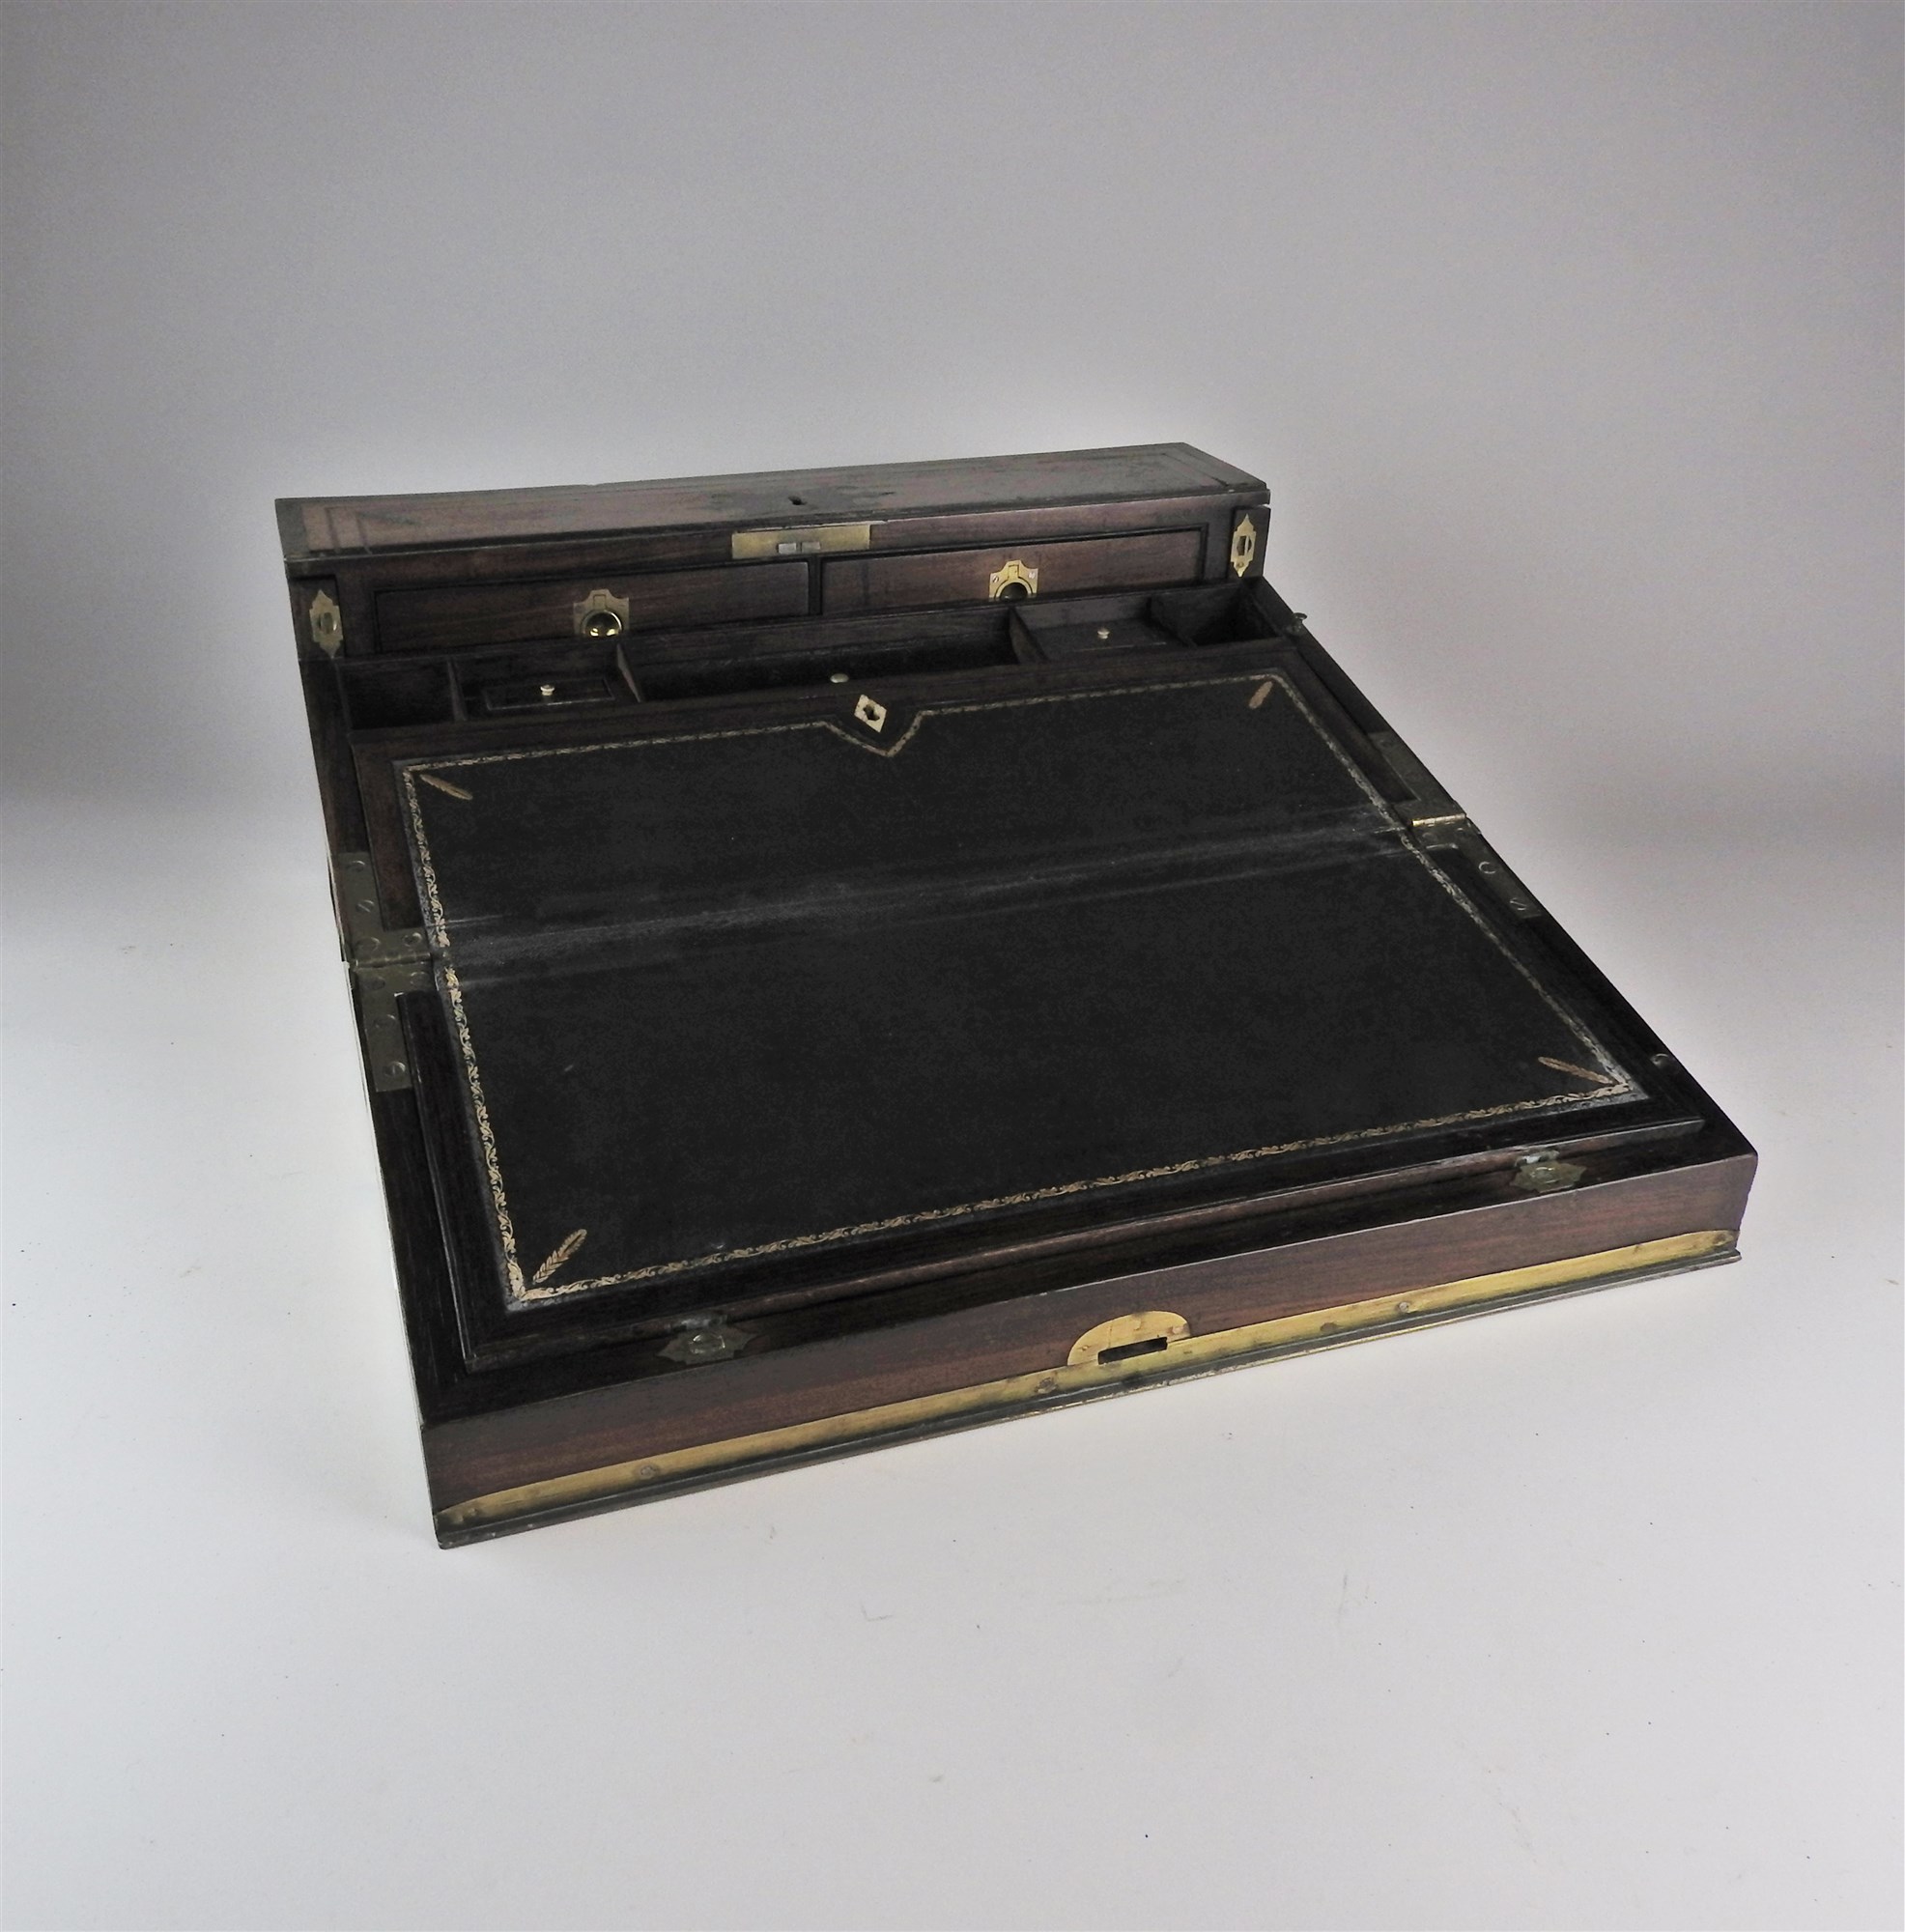 A rosewood and brass mounted campaign lap desk, mid 19th century